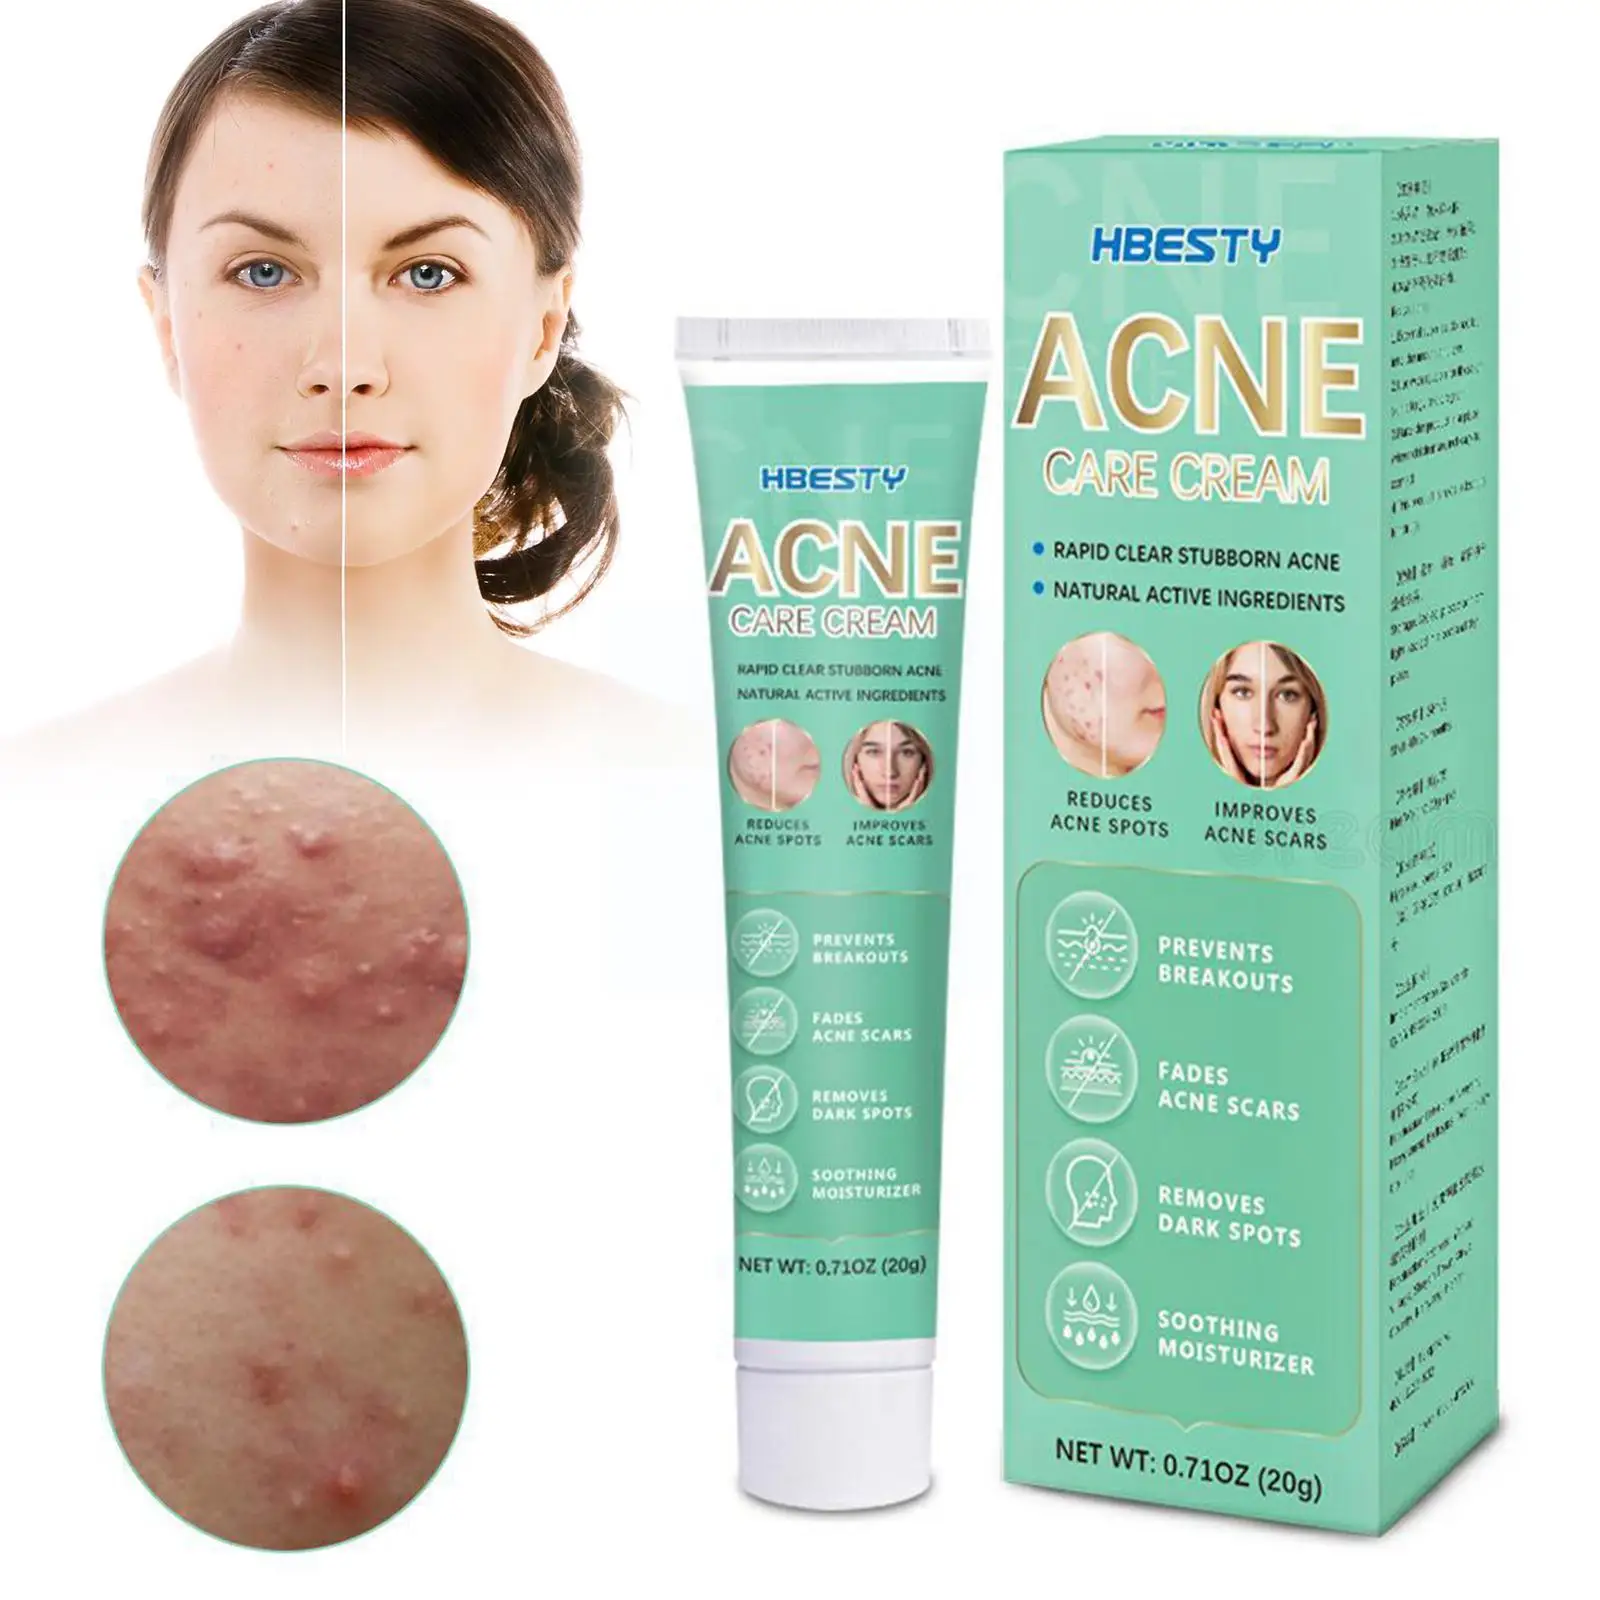 

20g Herbal Acne Treatment Face Cream Anti-Acne Gel Mark Acne Eliminate Face Pores Shrink Whitening Removal Care Pimples P7N5